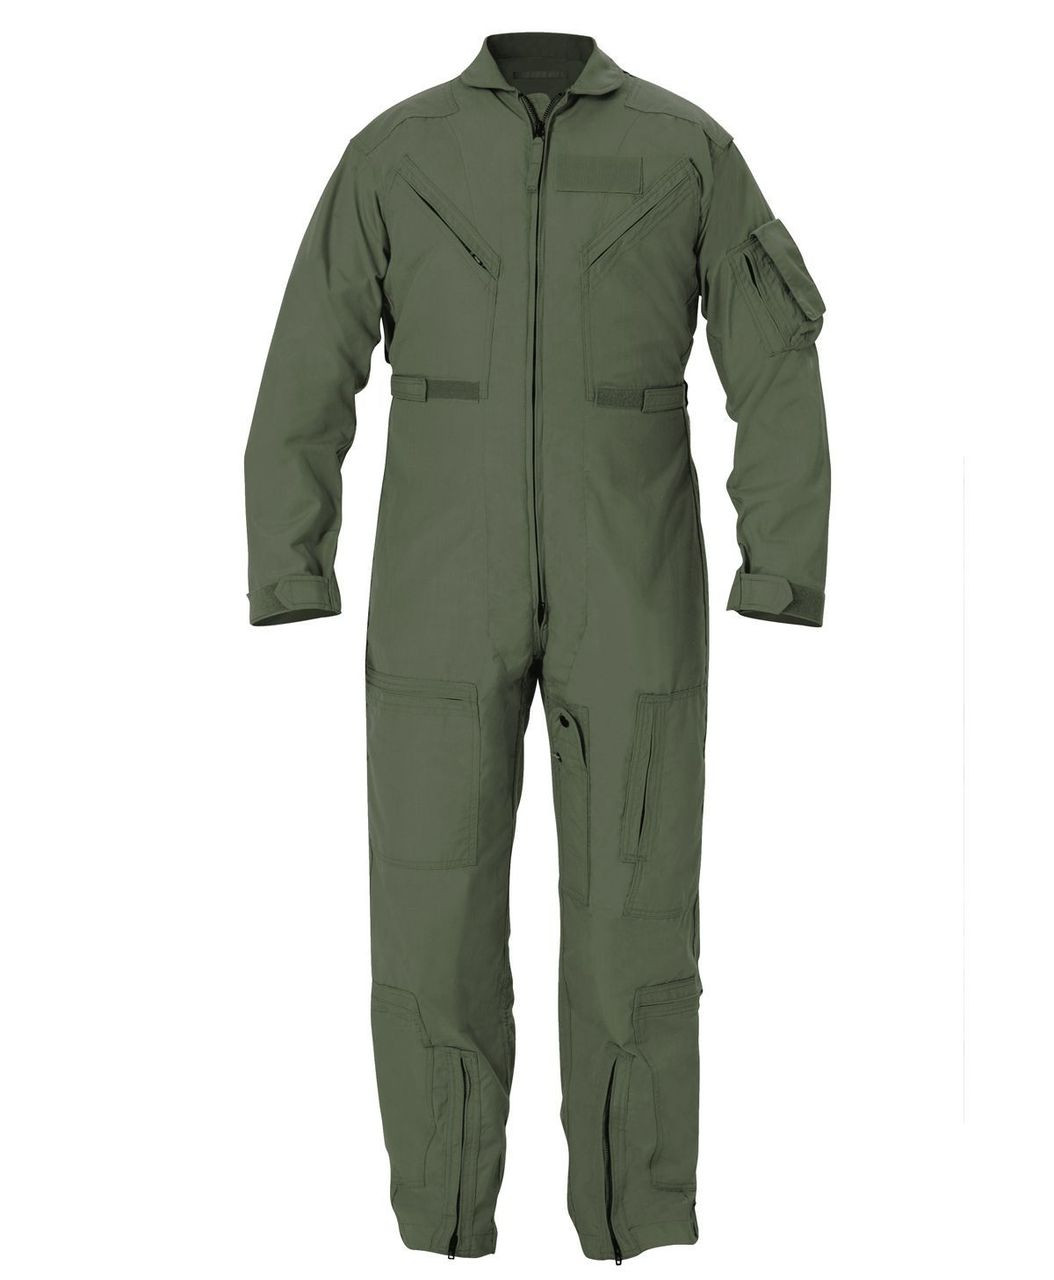 Nomex Coverall Size Chart | lupon.gov.ph